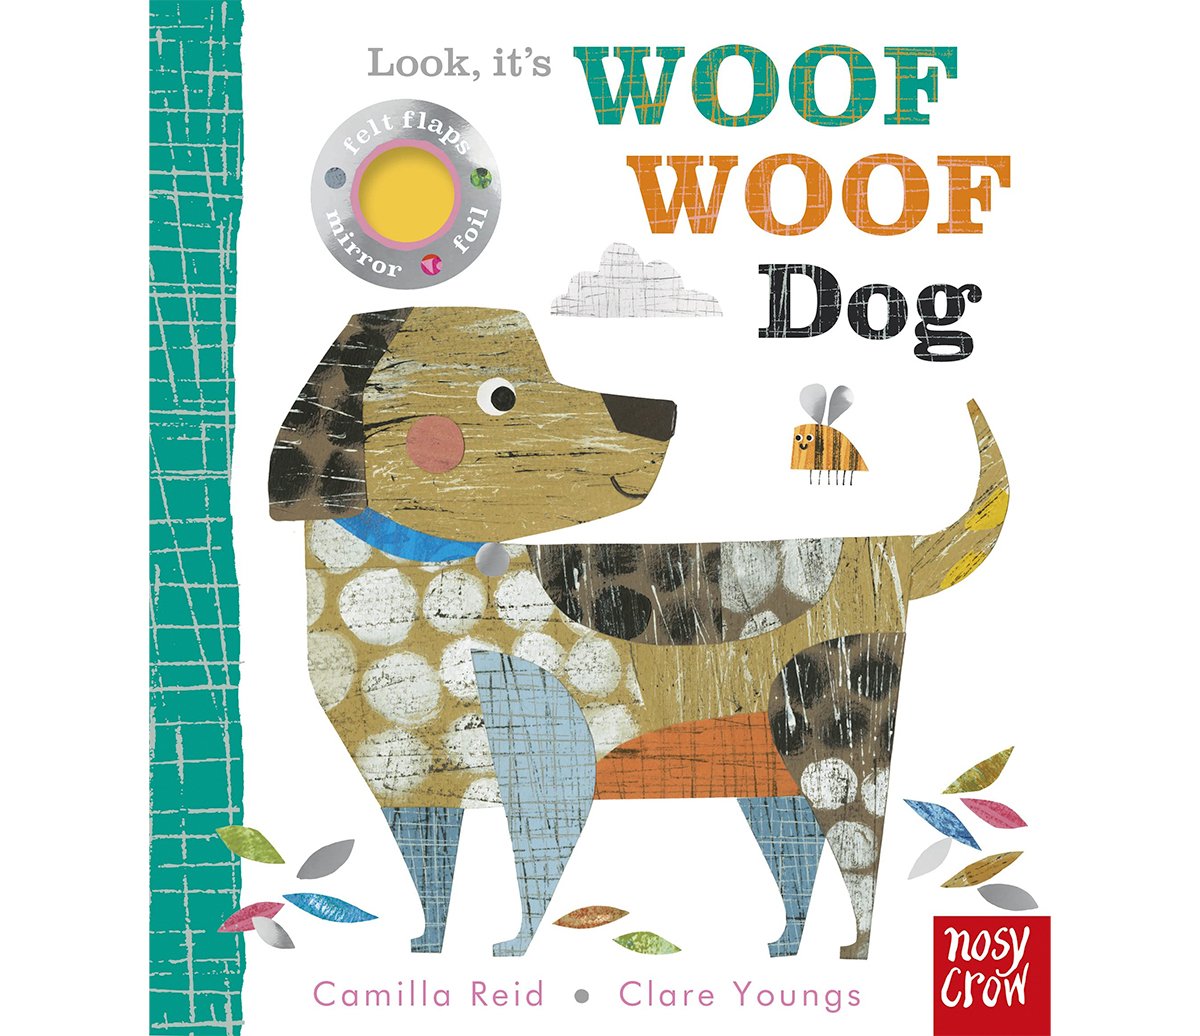 clare-youngs-woof-woof-dog.jpg